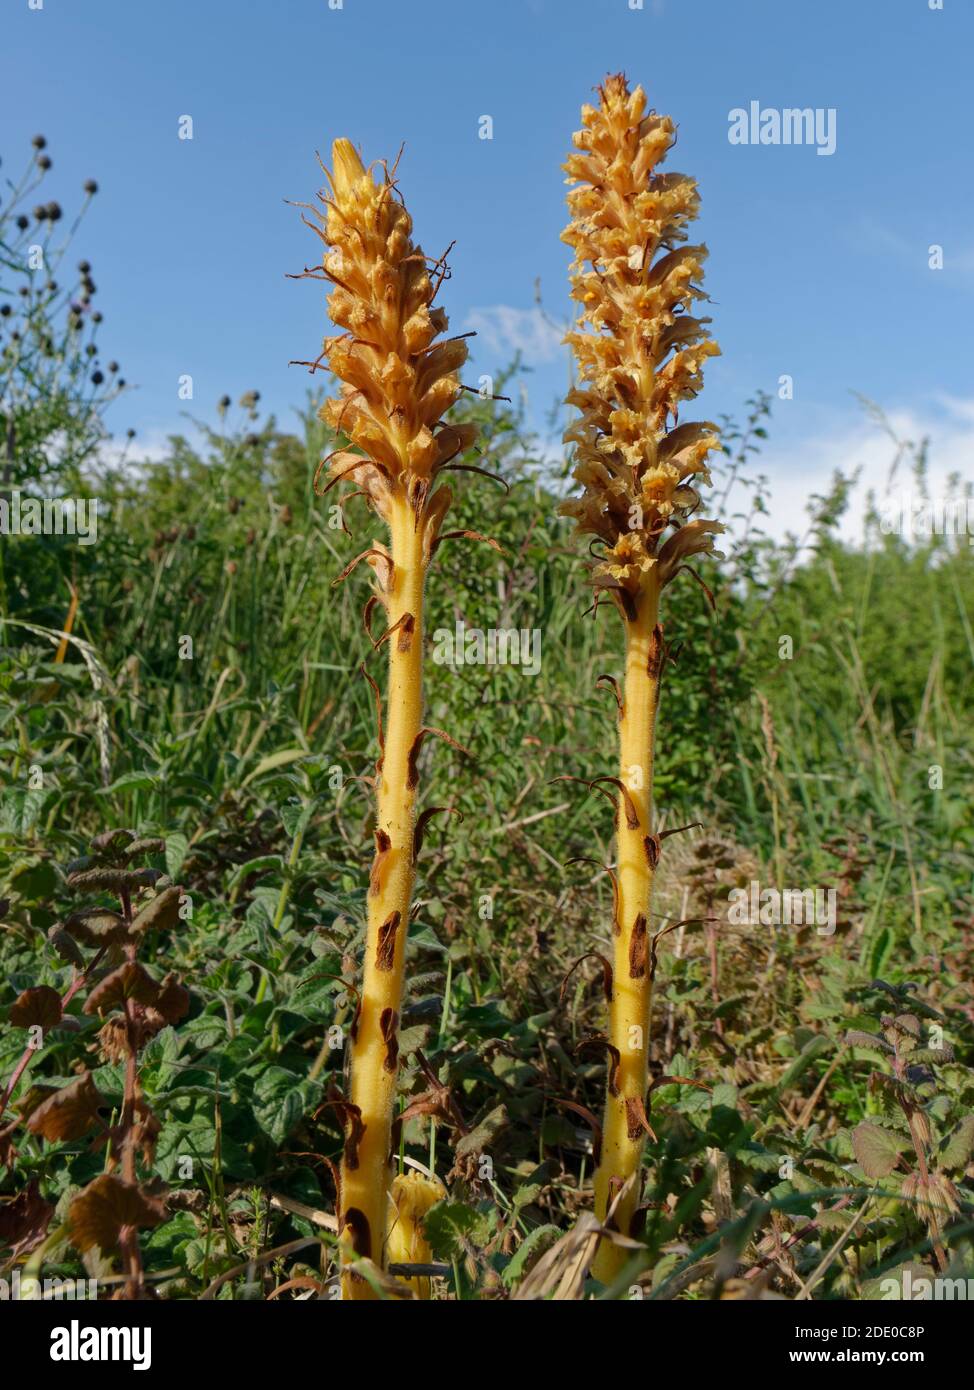 Knapweed broomrape (Orobanche elatior) flower spikes with a clump of its host Greater Knapweed (Centaurea scabiosa) in the background, Wiltshire, UK. Stock Photo